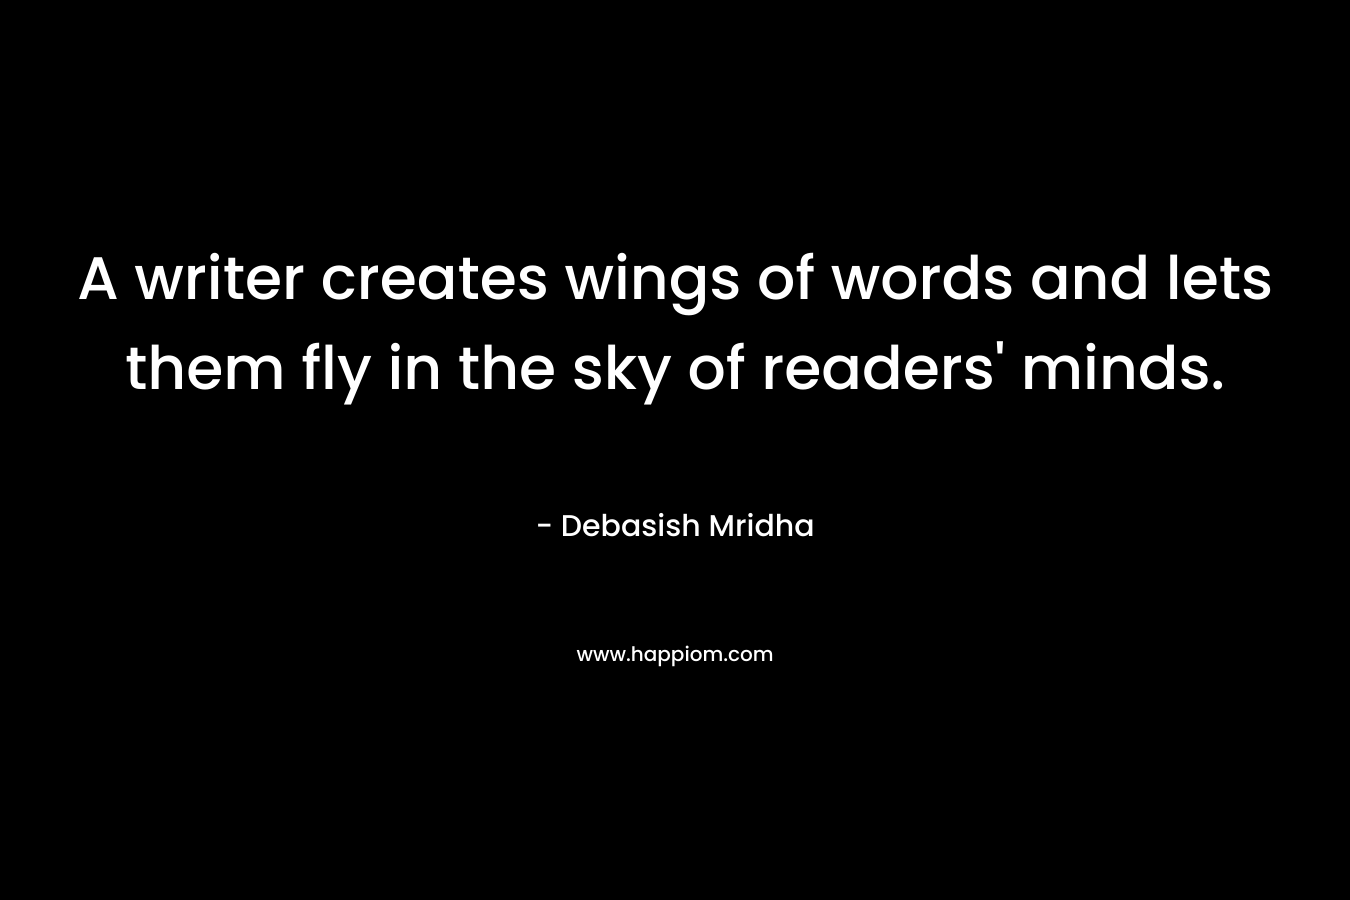 A writer creates wings of words and lets them fly in the sky of readers' minds.